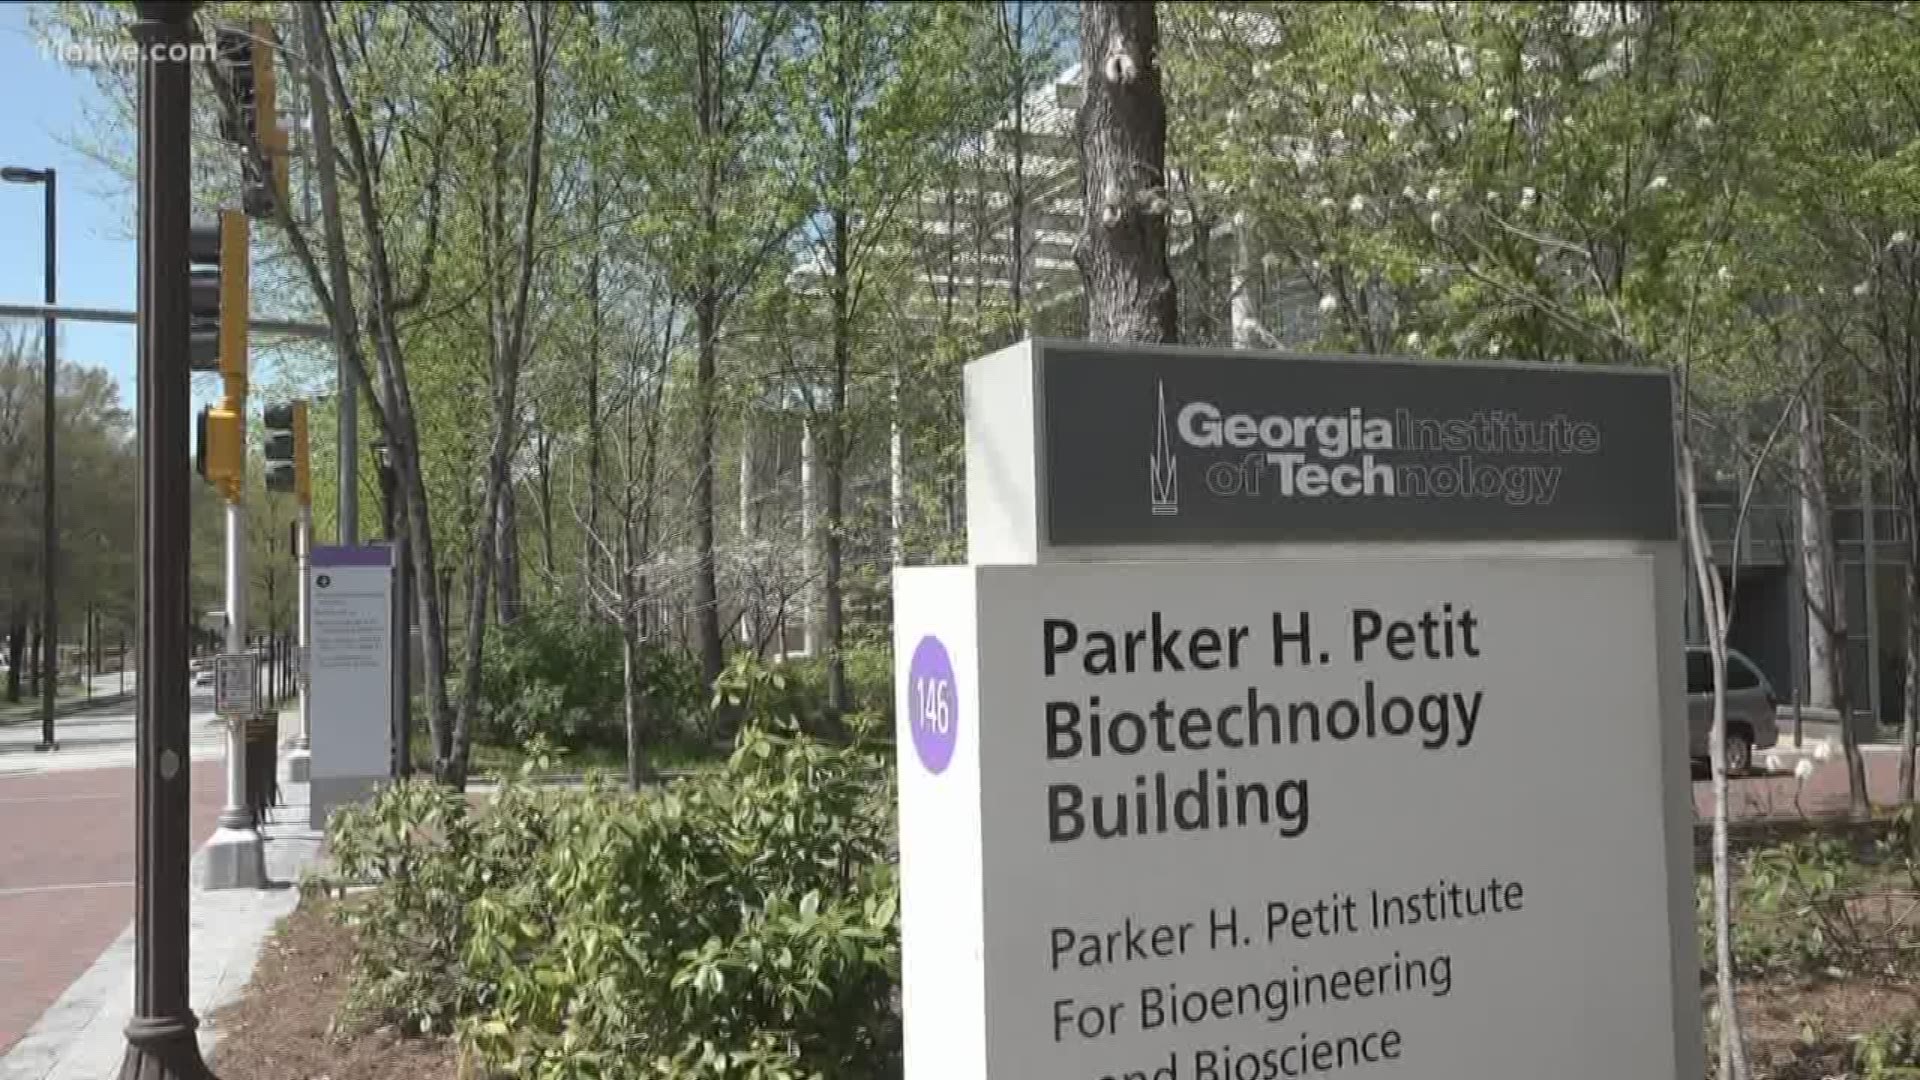 Business First ranked Georgia Tech 11th.